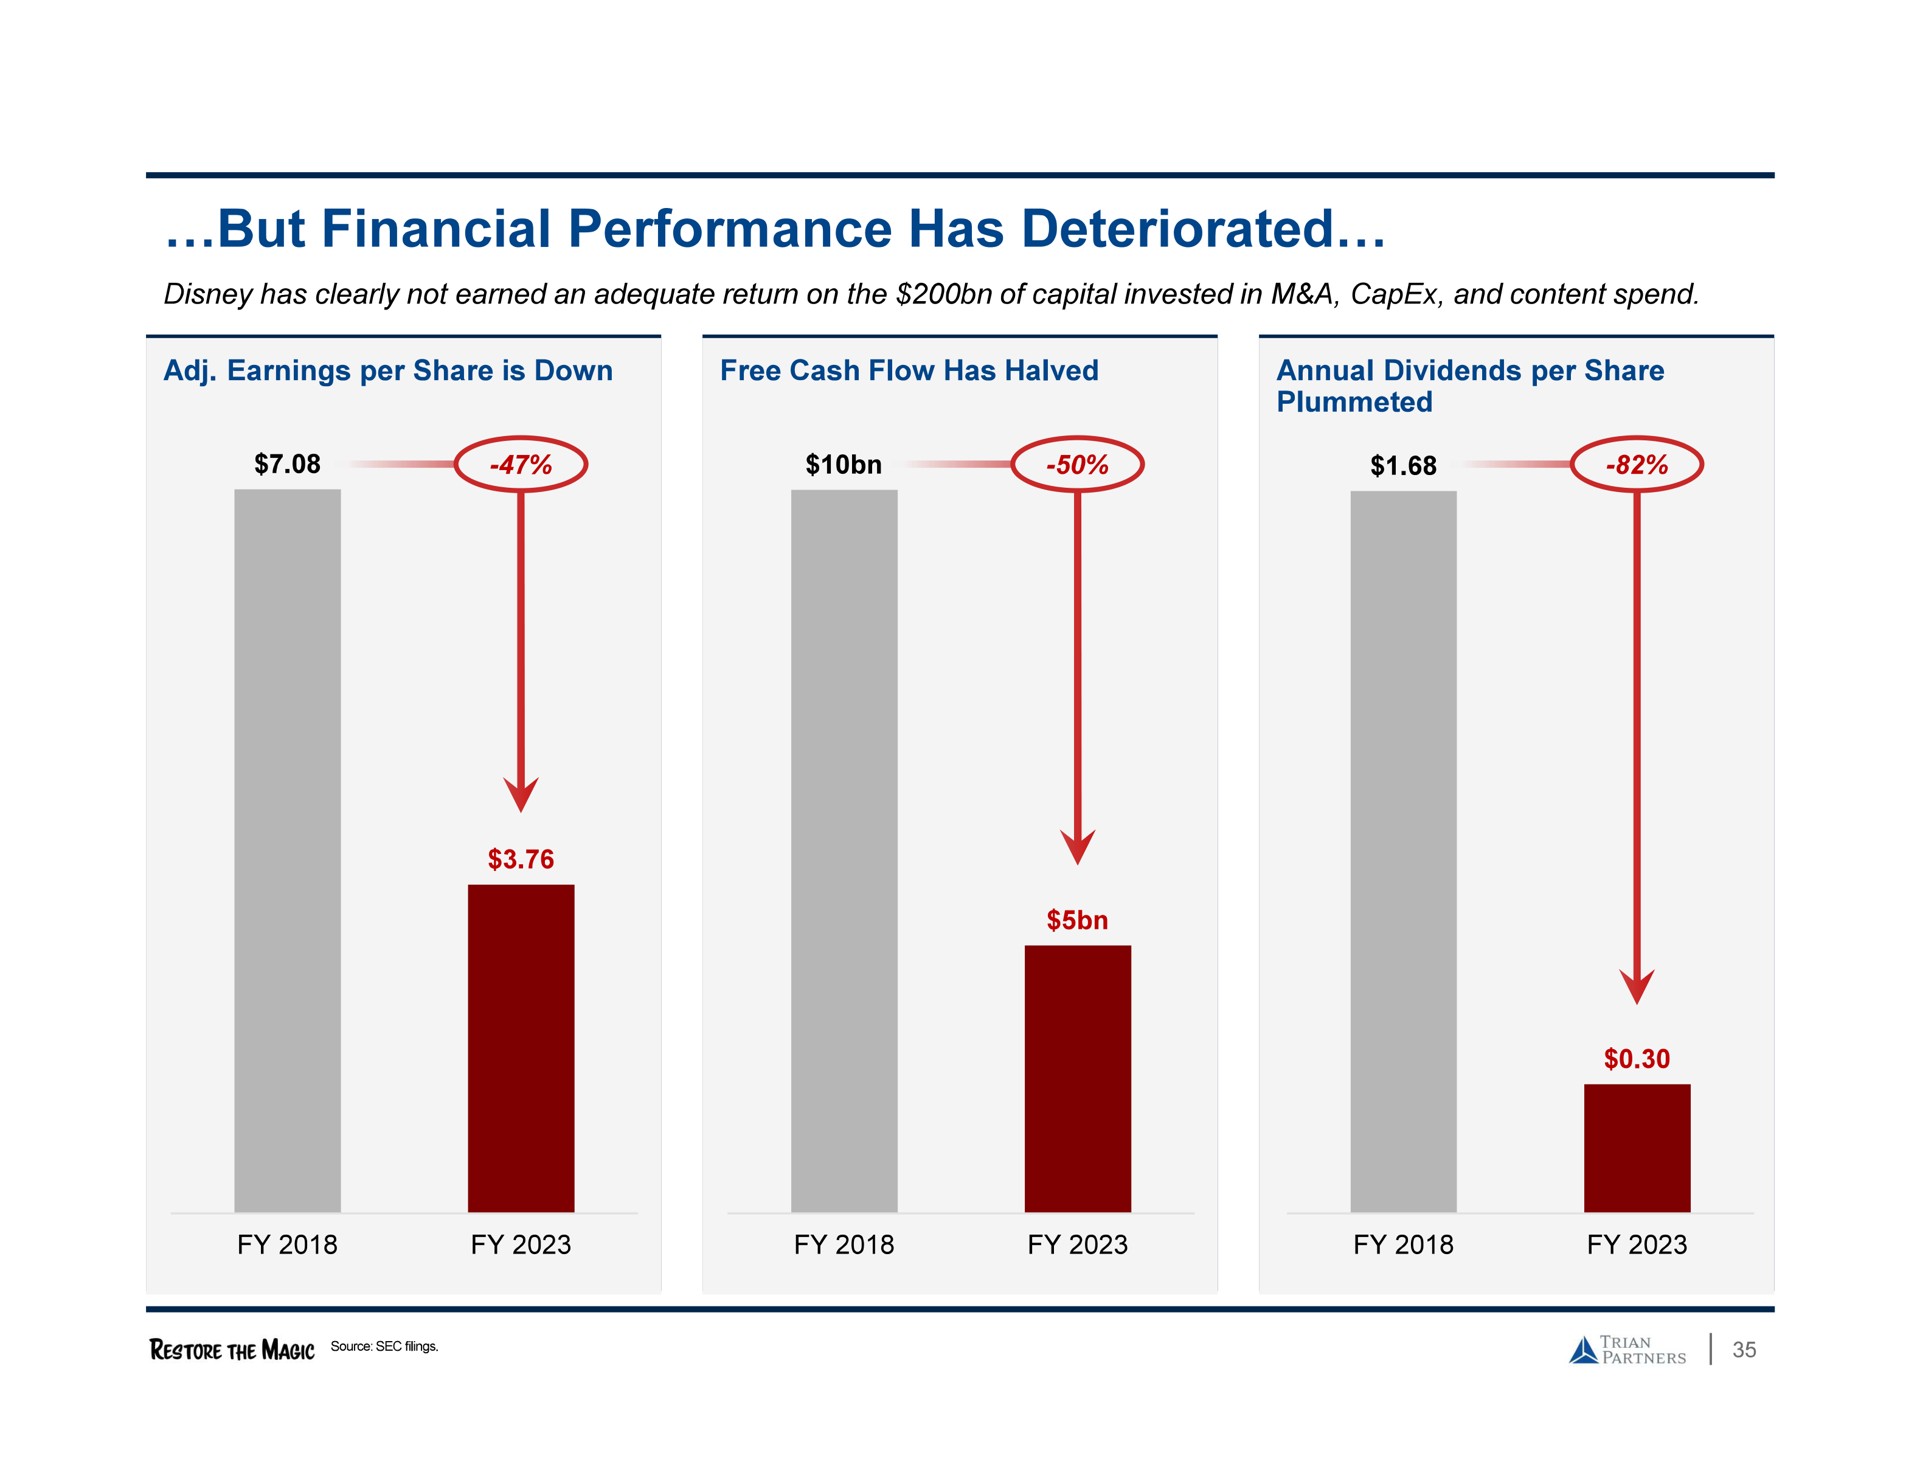 but financial performance has deteriorated | Trian Partners